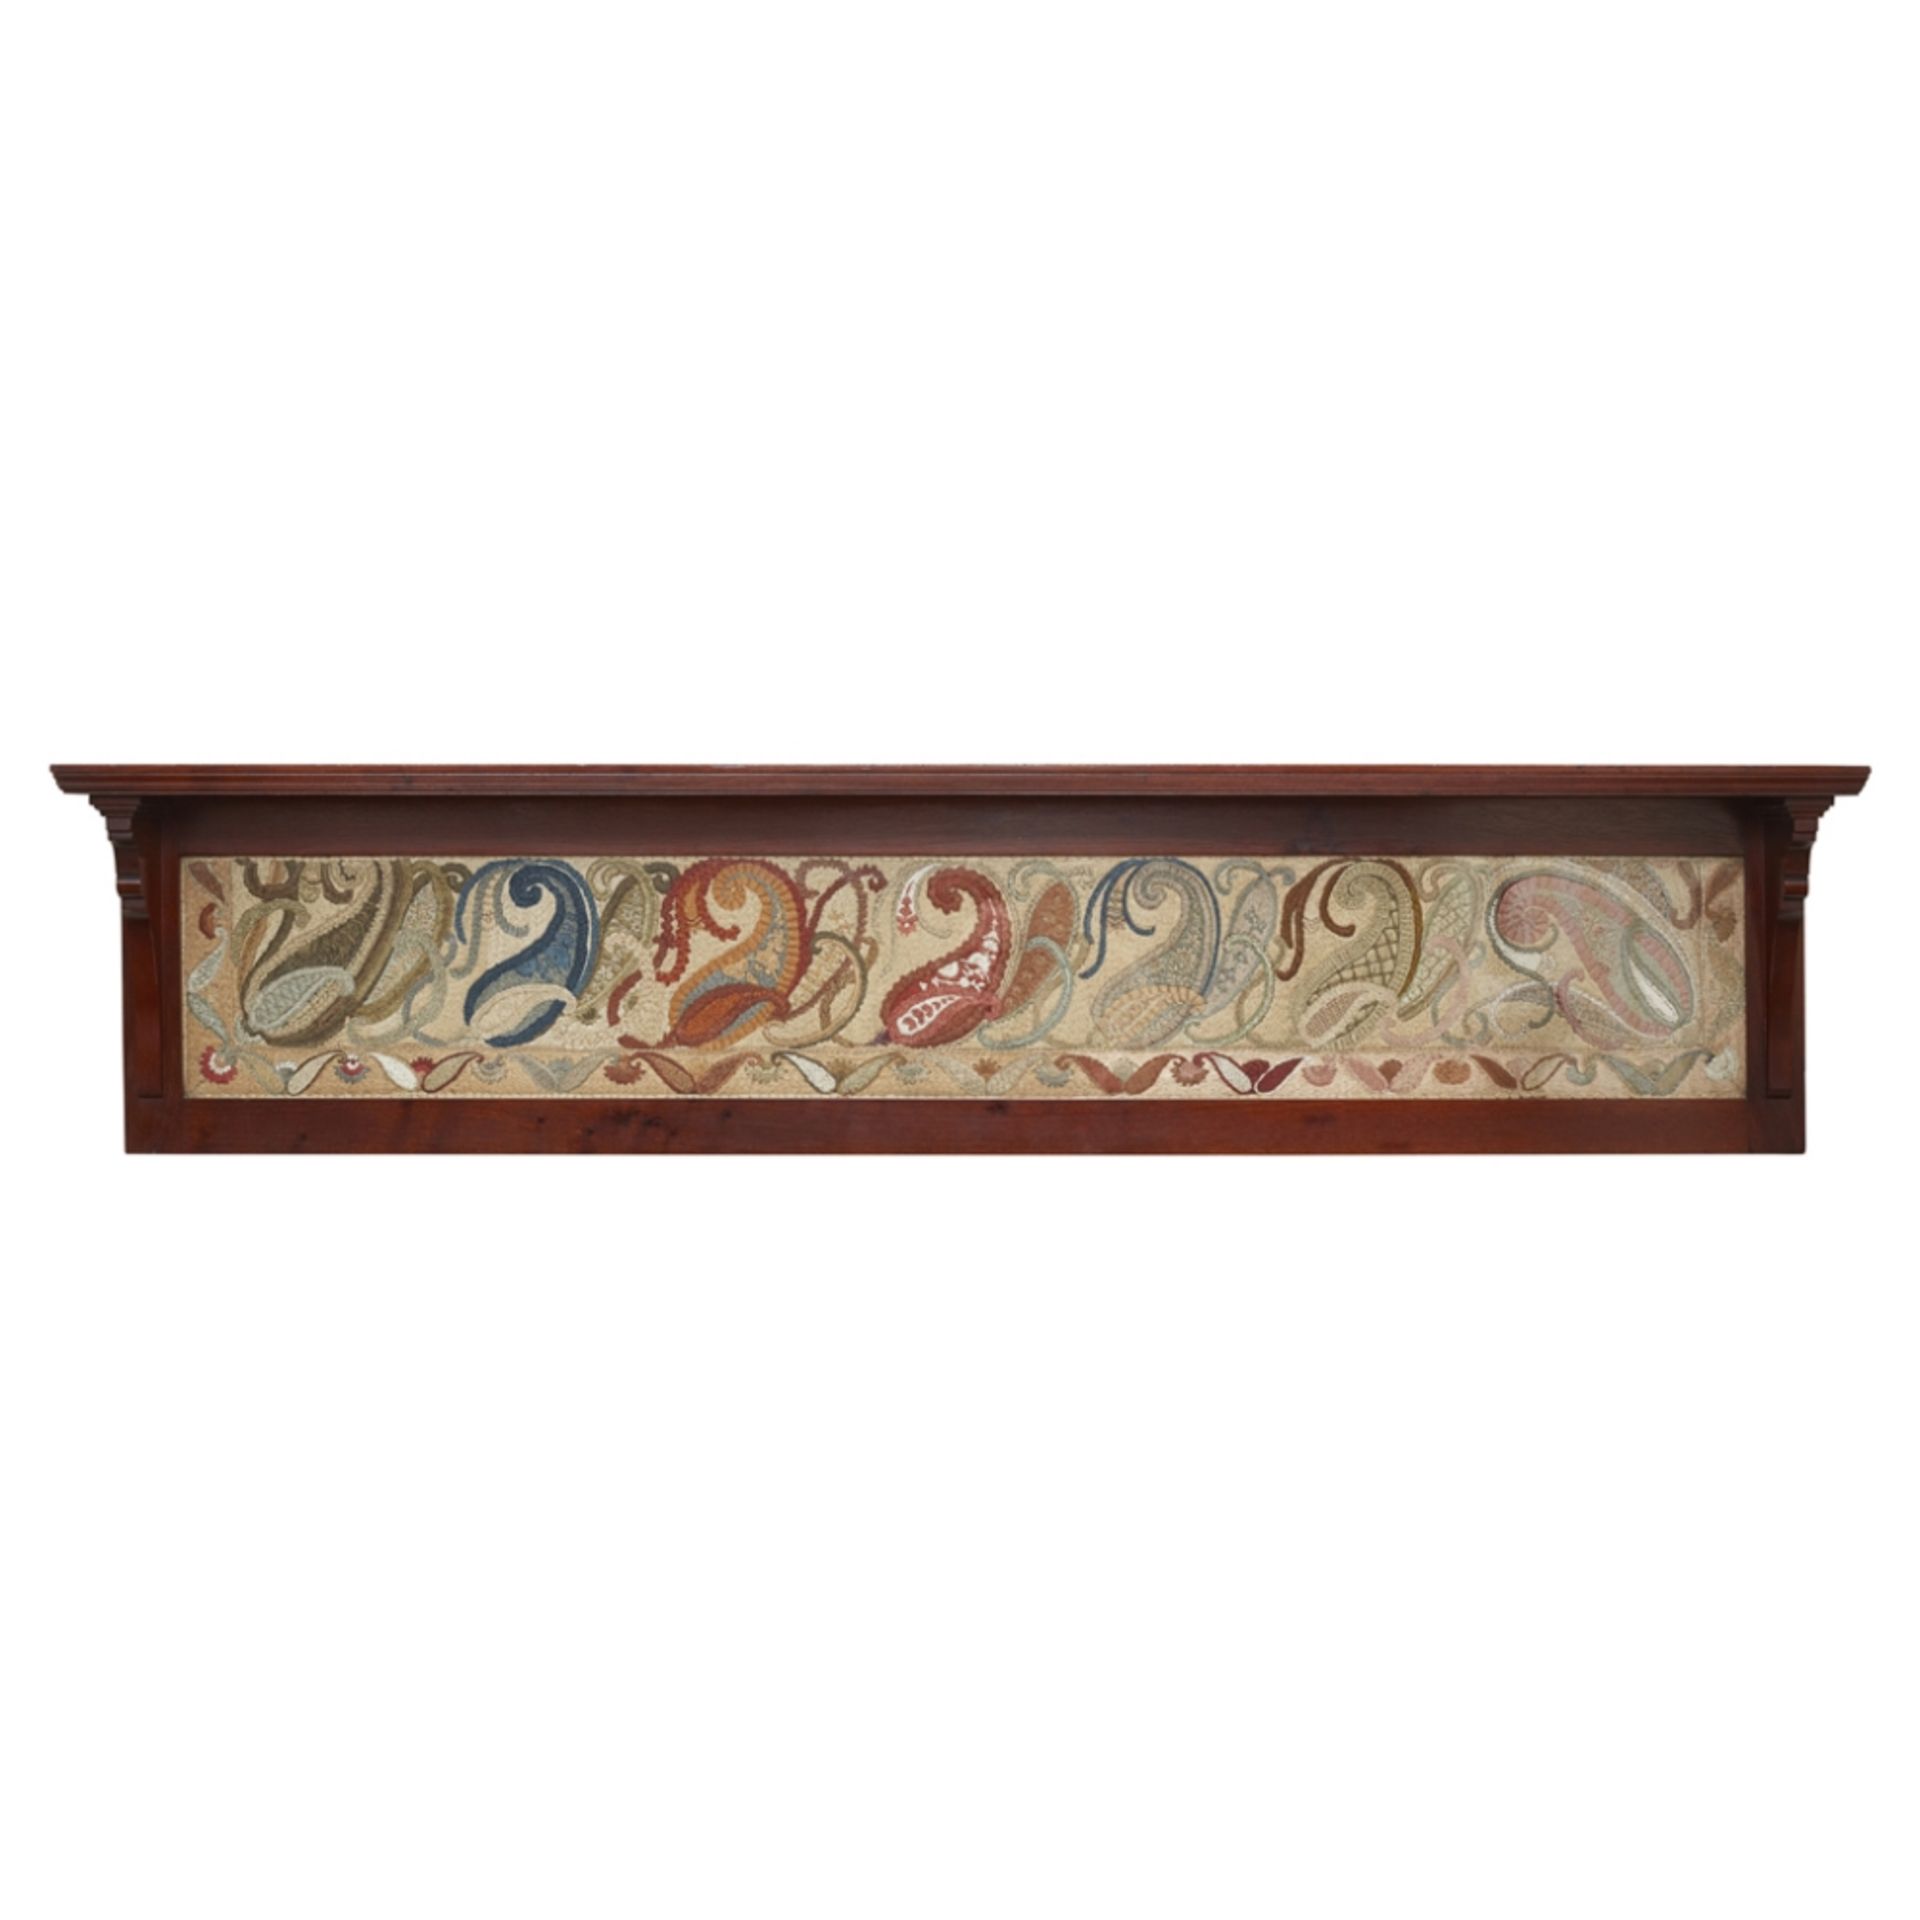 MANNER OF MORRIS & CO. ARTS & CRAFTS MAHOGANY FRAMED NEEDLEWORK PANEL AND WALL SHELF, CIRCA 1890